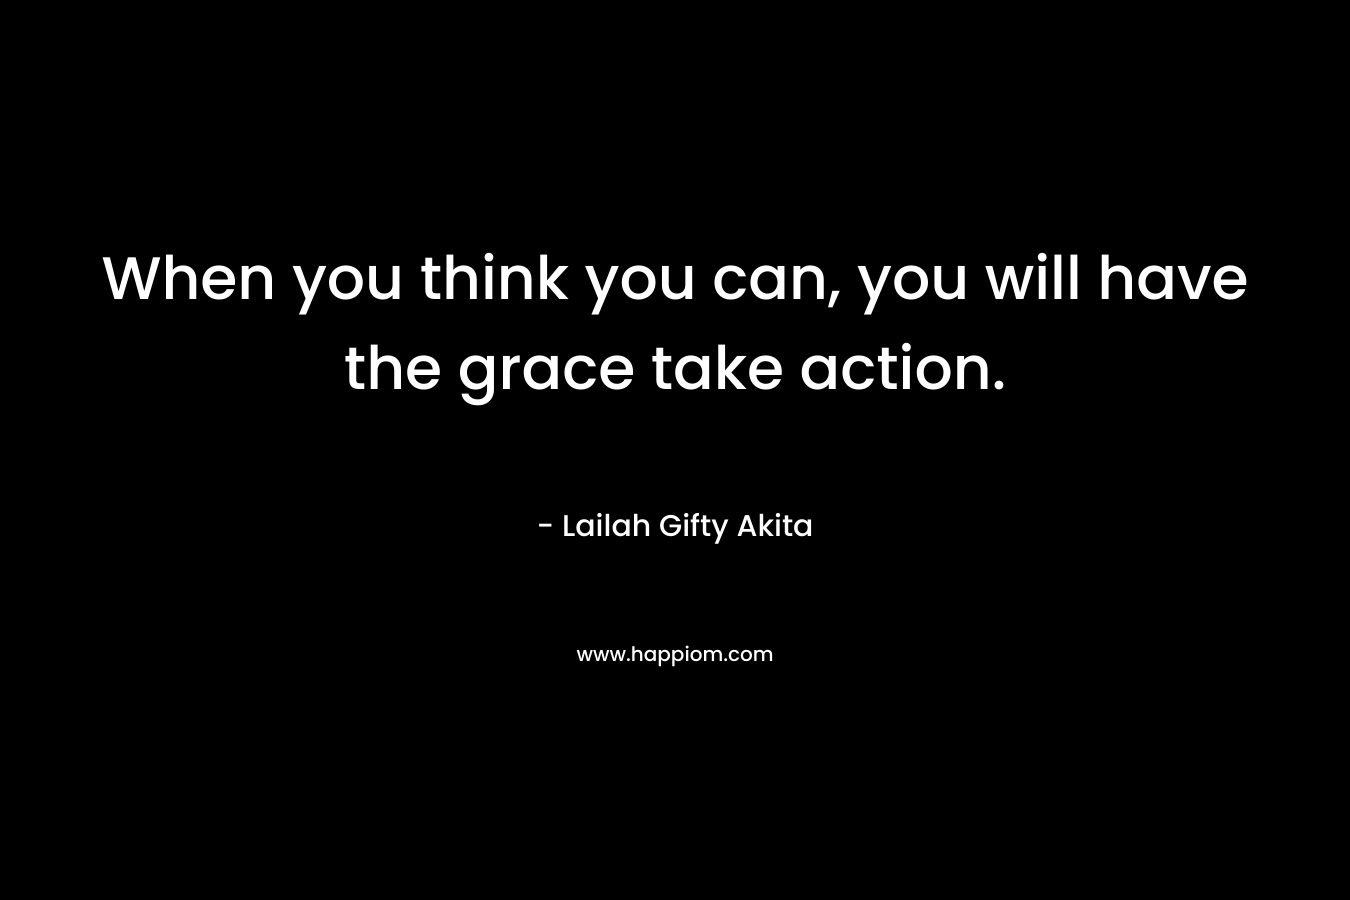 When you think you can, you will have the grace take action.